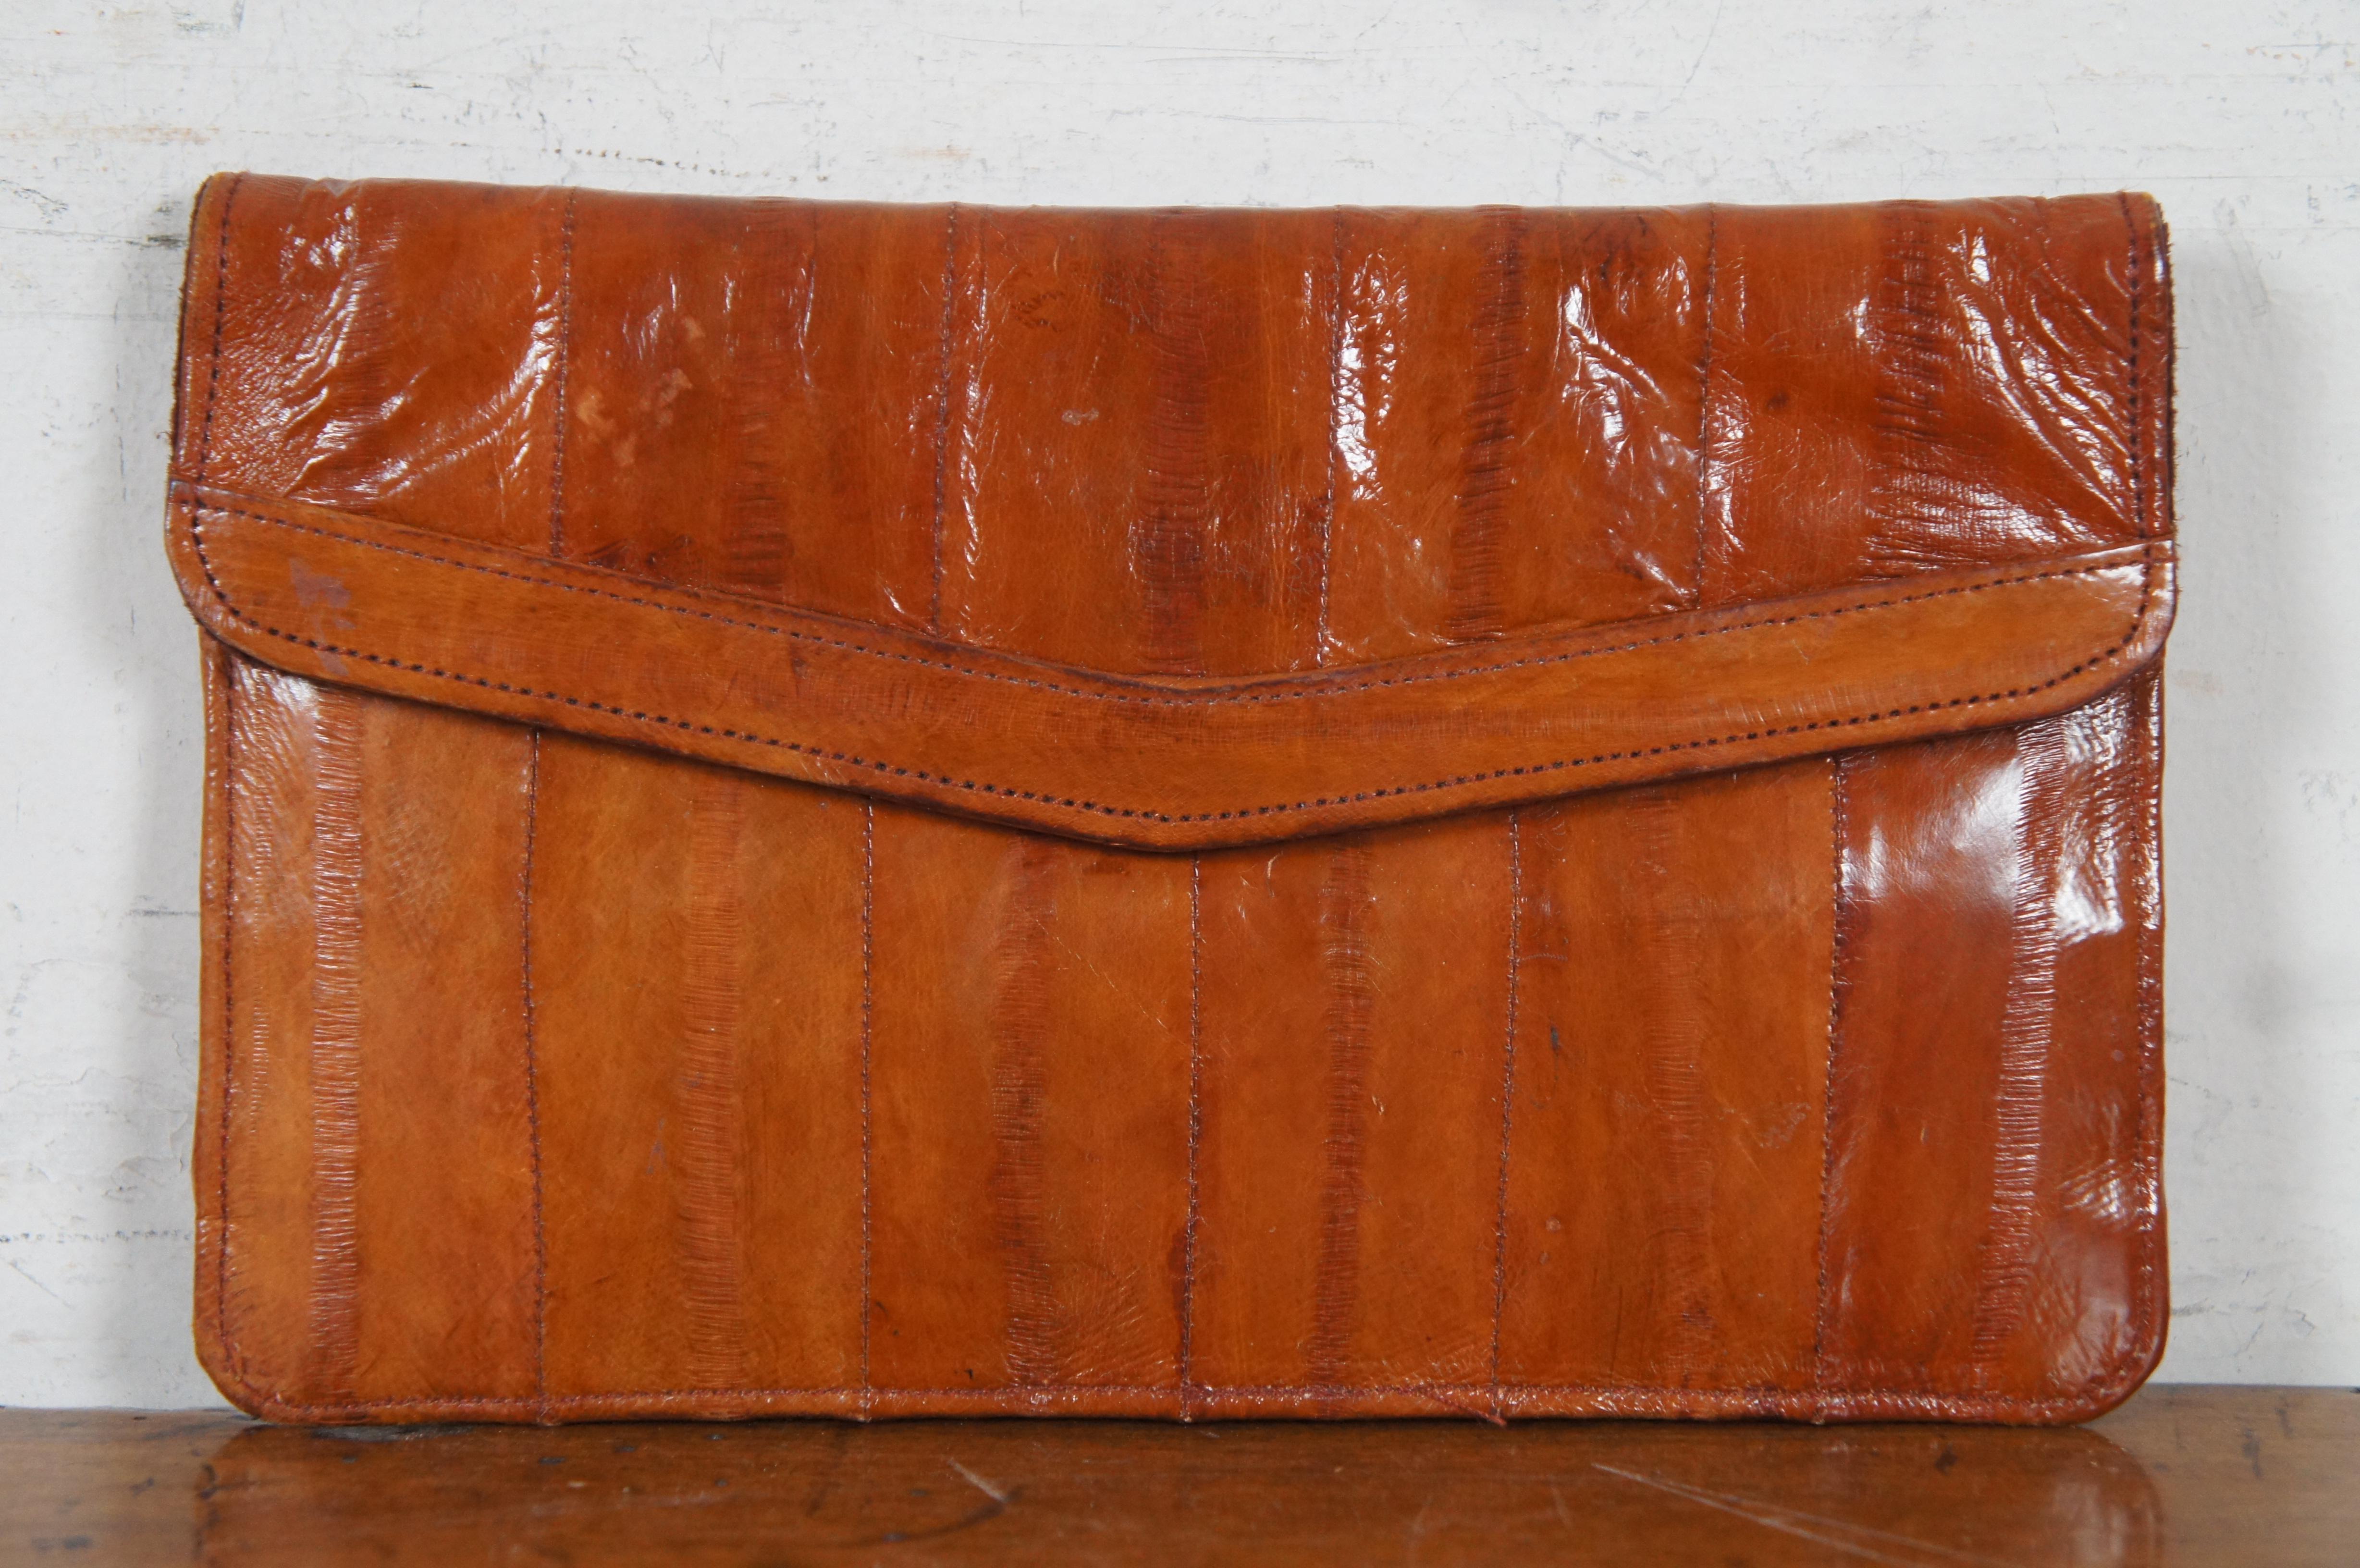 5 Vintage Eel Skin Soft Leather Clutch Coin Purses Billfold Wallet Pouch Bag In Good Condition For Sale In Dayton, OH